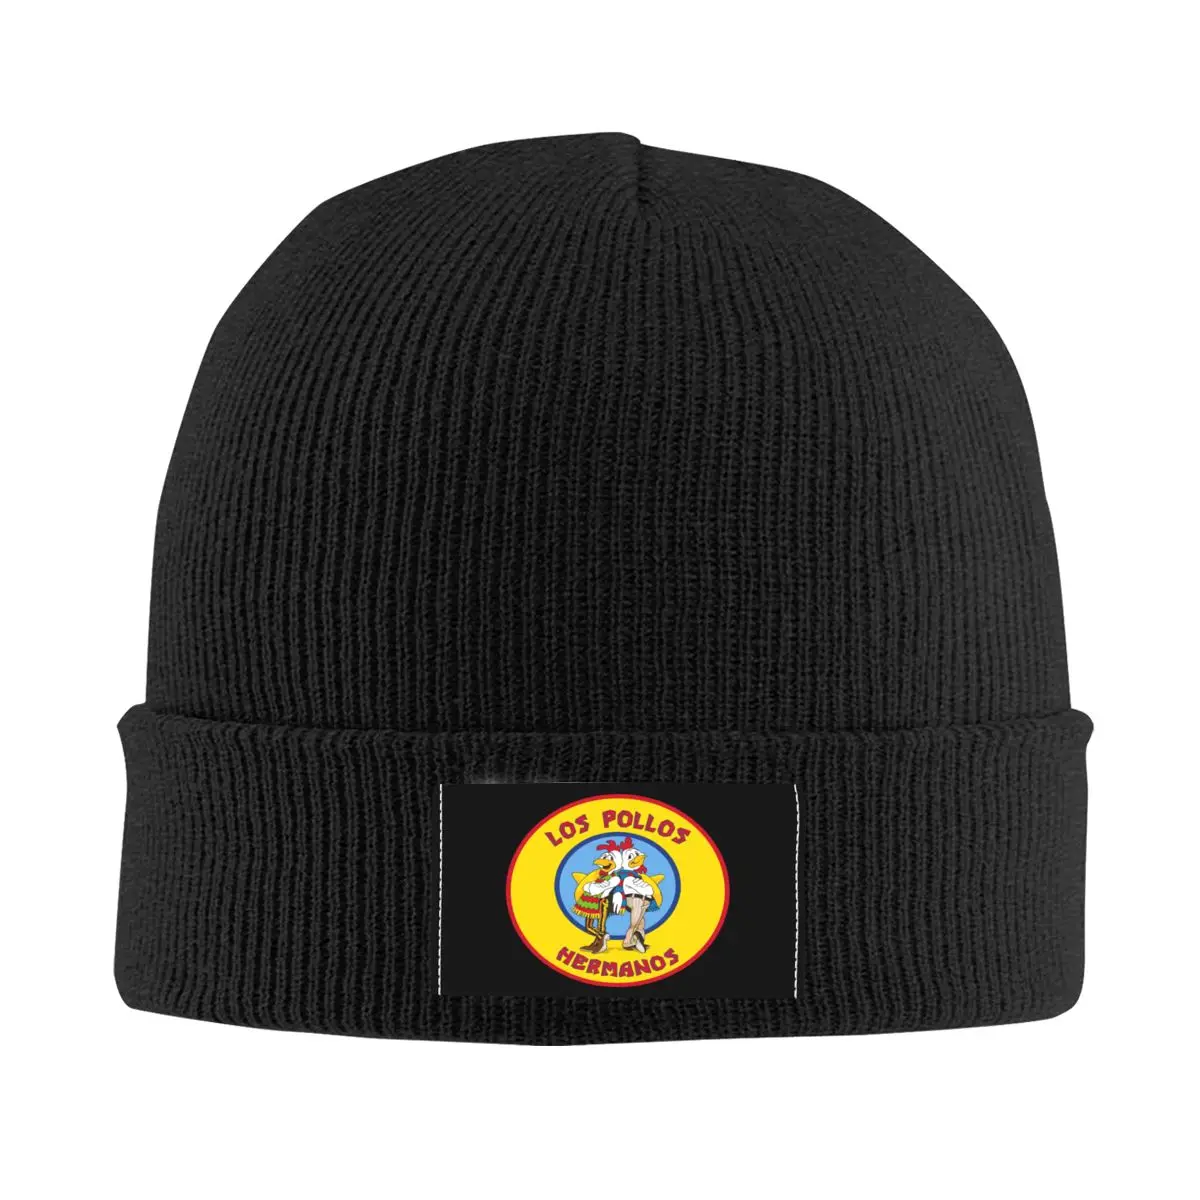 

Breaking Bad Los Pollos Hermanos Beanie Cap Unisex Winter Warm Bonnet Knitted Hat The Chicken Brothers Skullies Beanies Hats 1